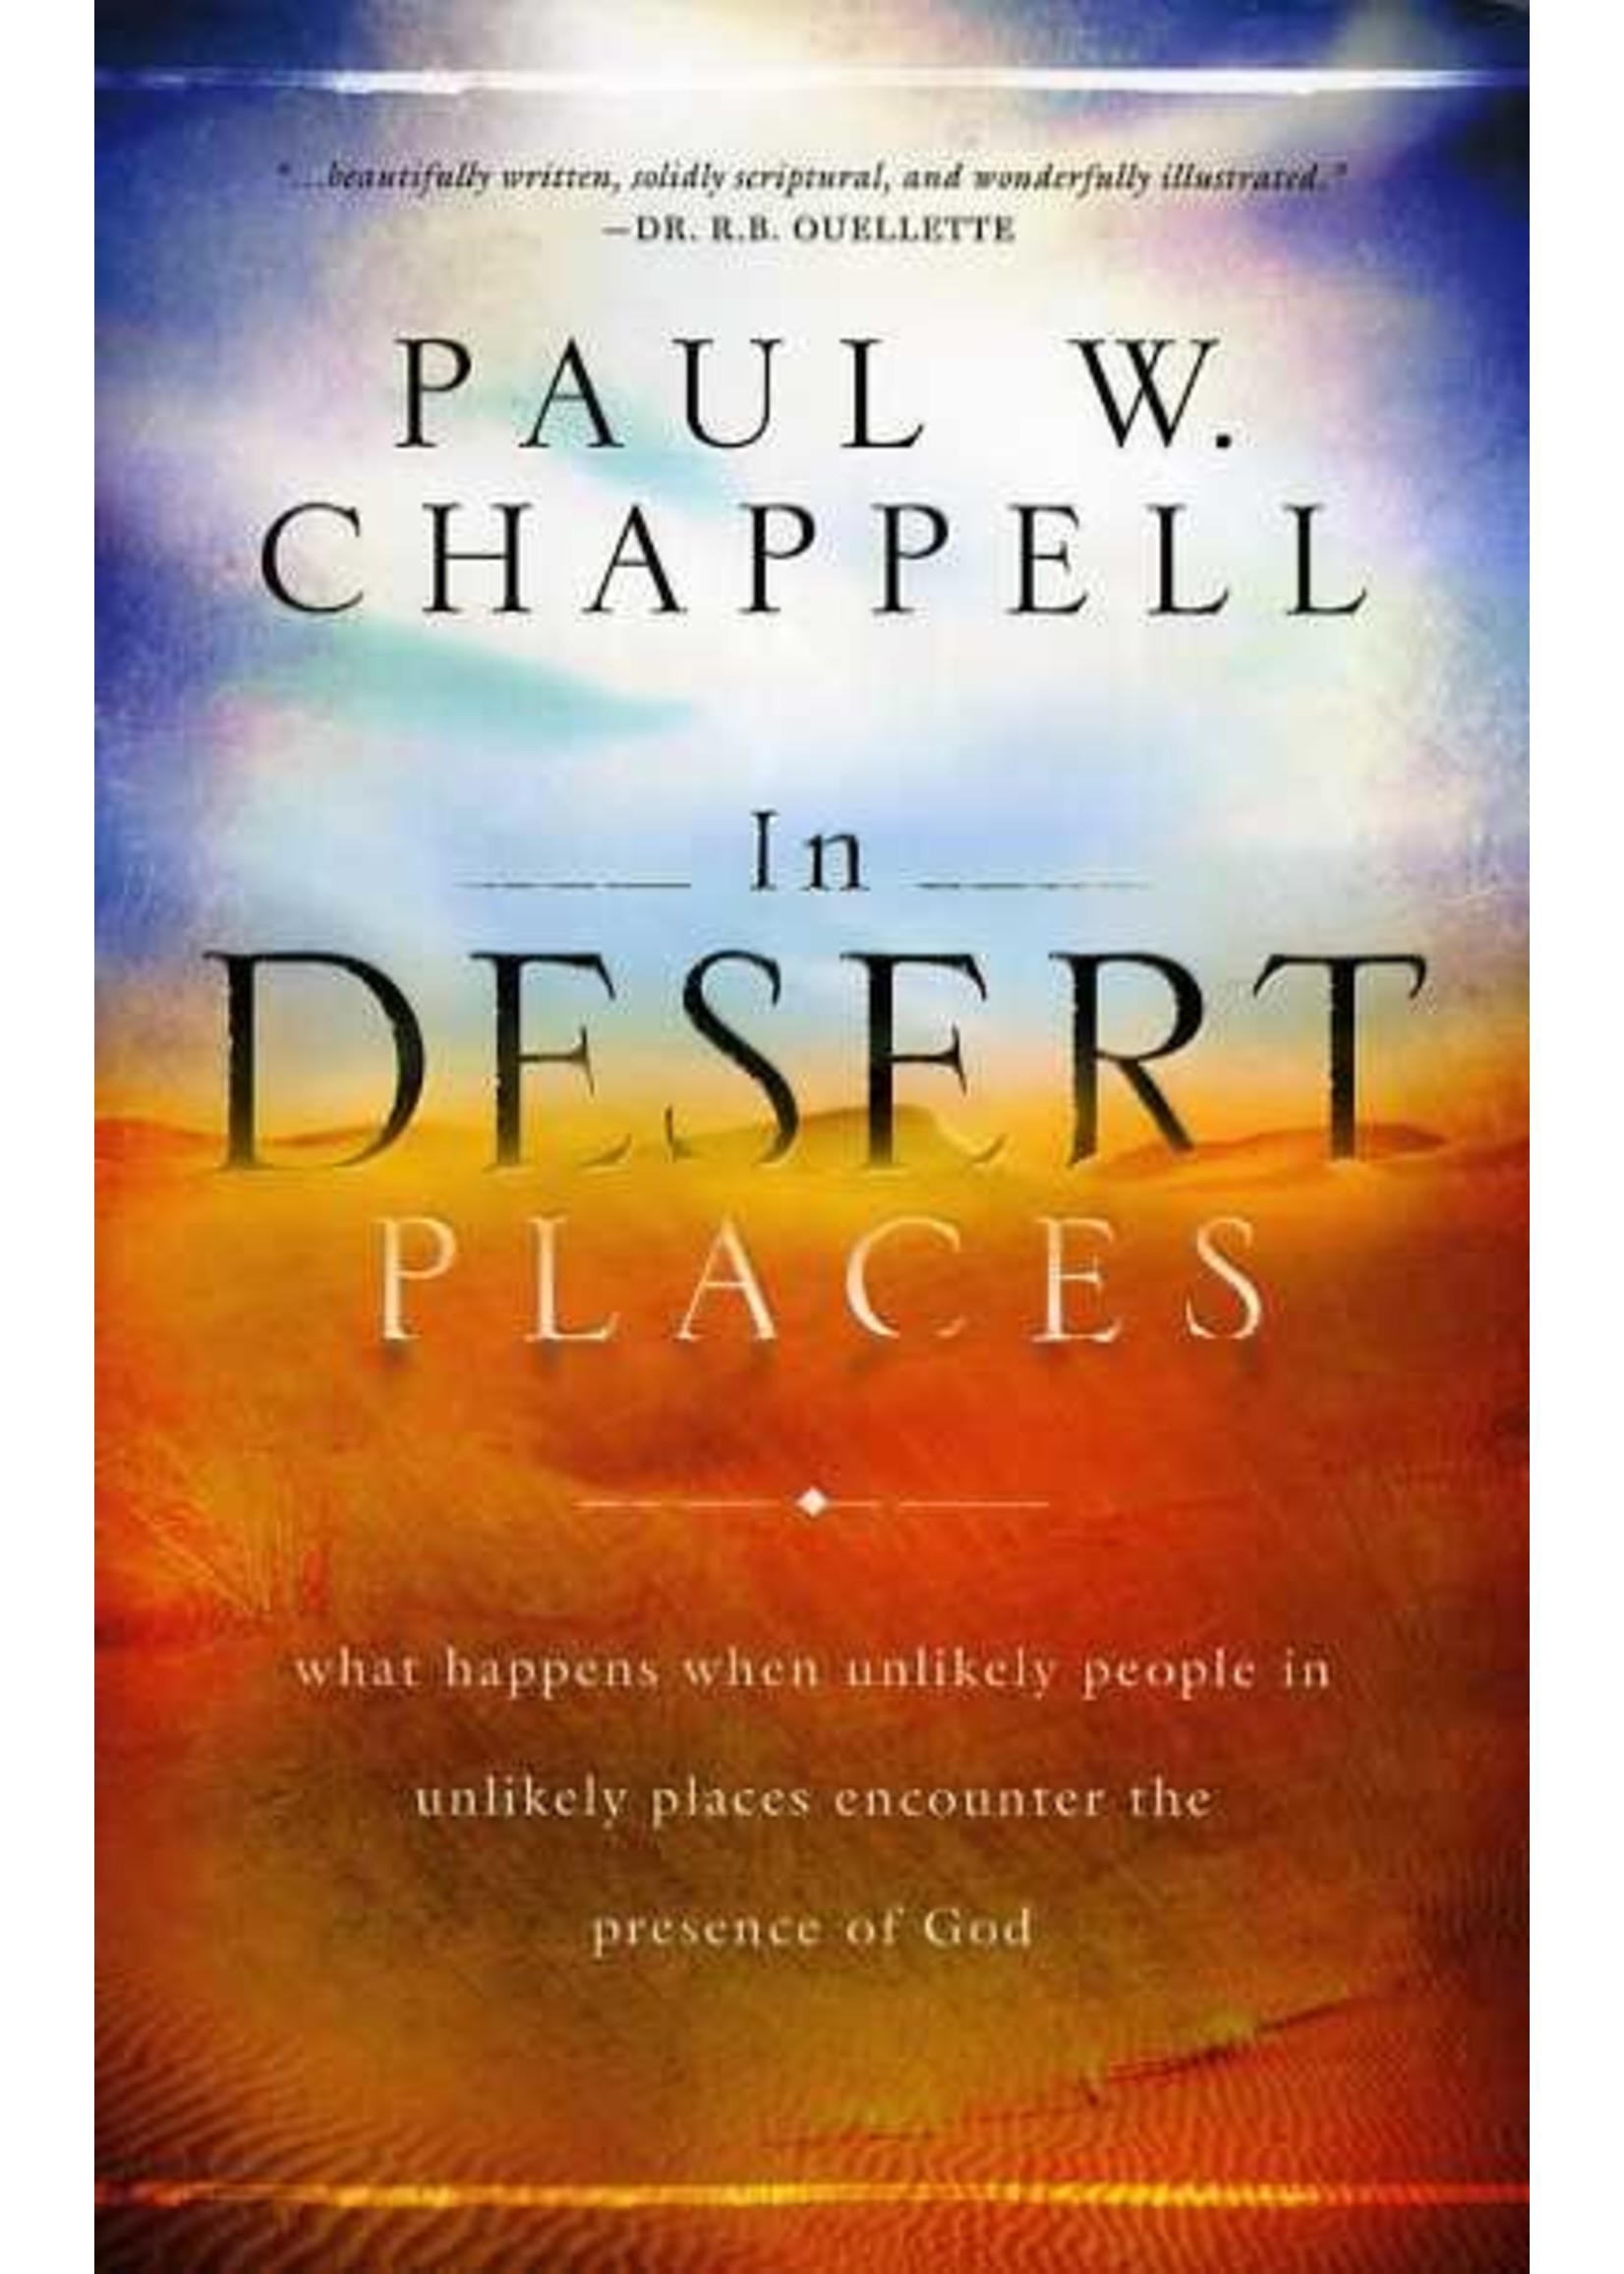 In Desert Places - Paul Chappell